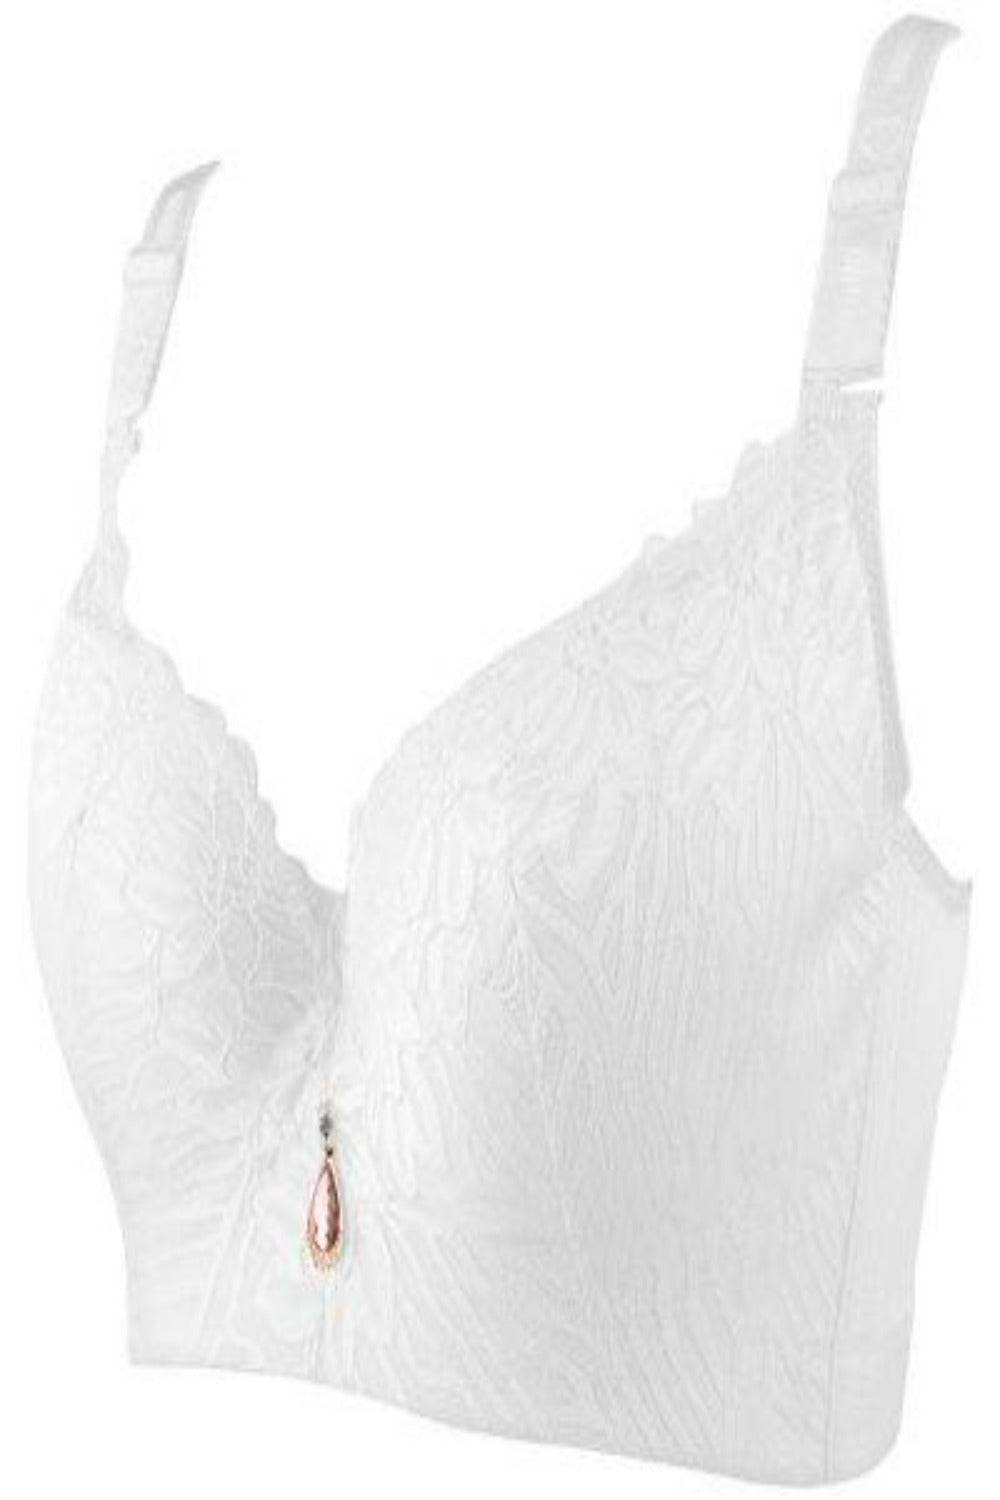 Plus Size Lace Lifting And Shaping Full Coverage Bra - TGC Boutique - Lingerie